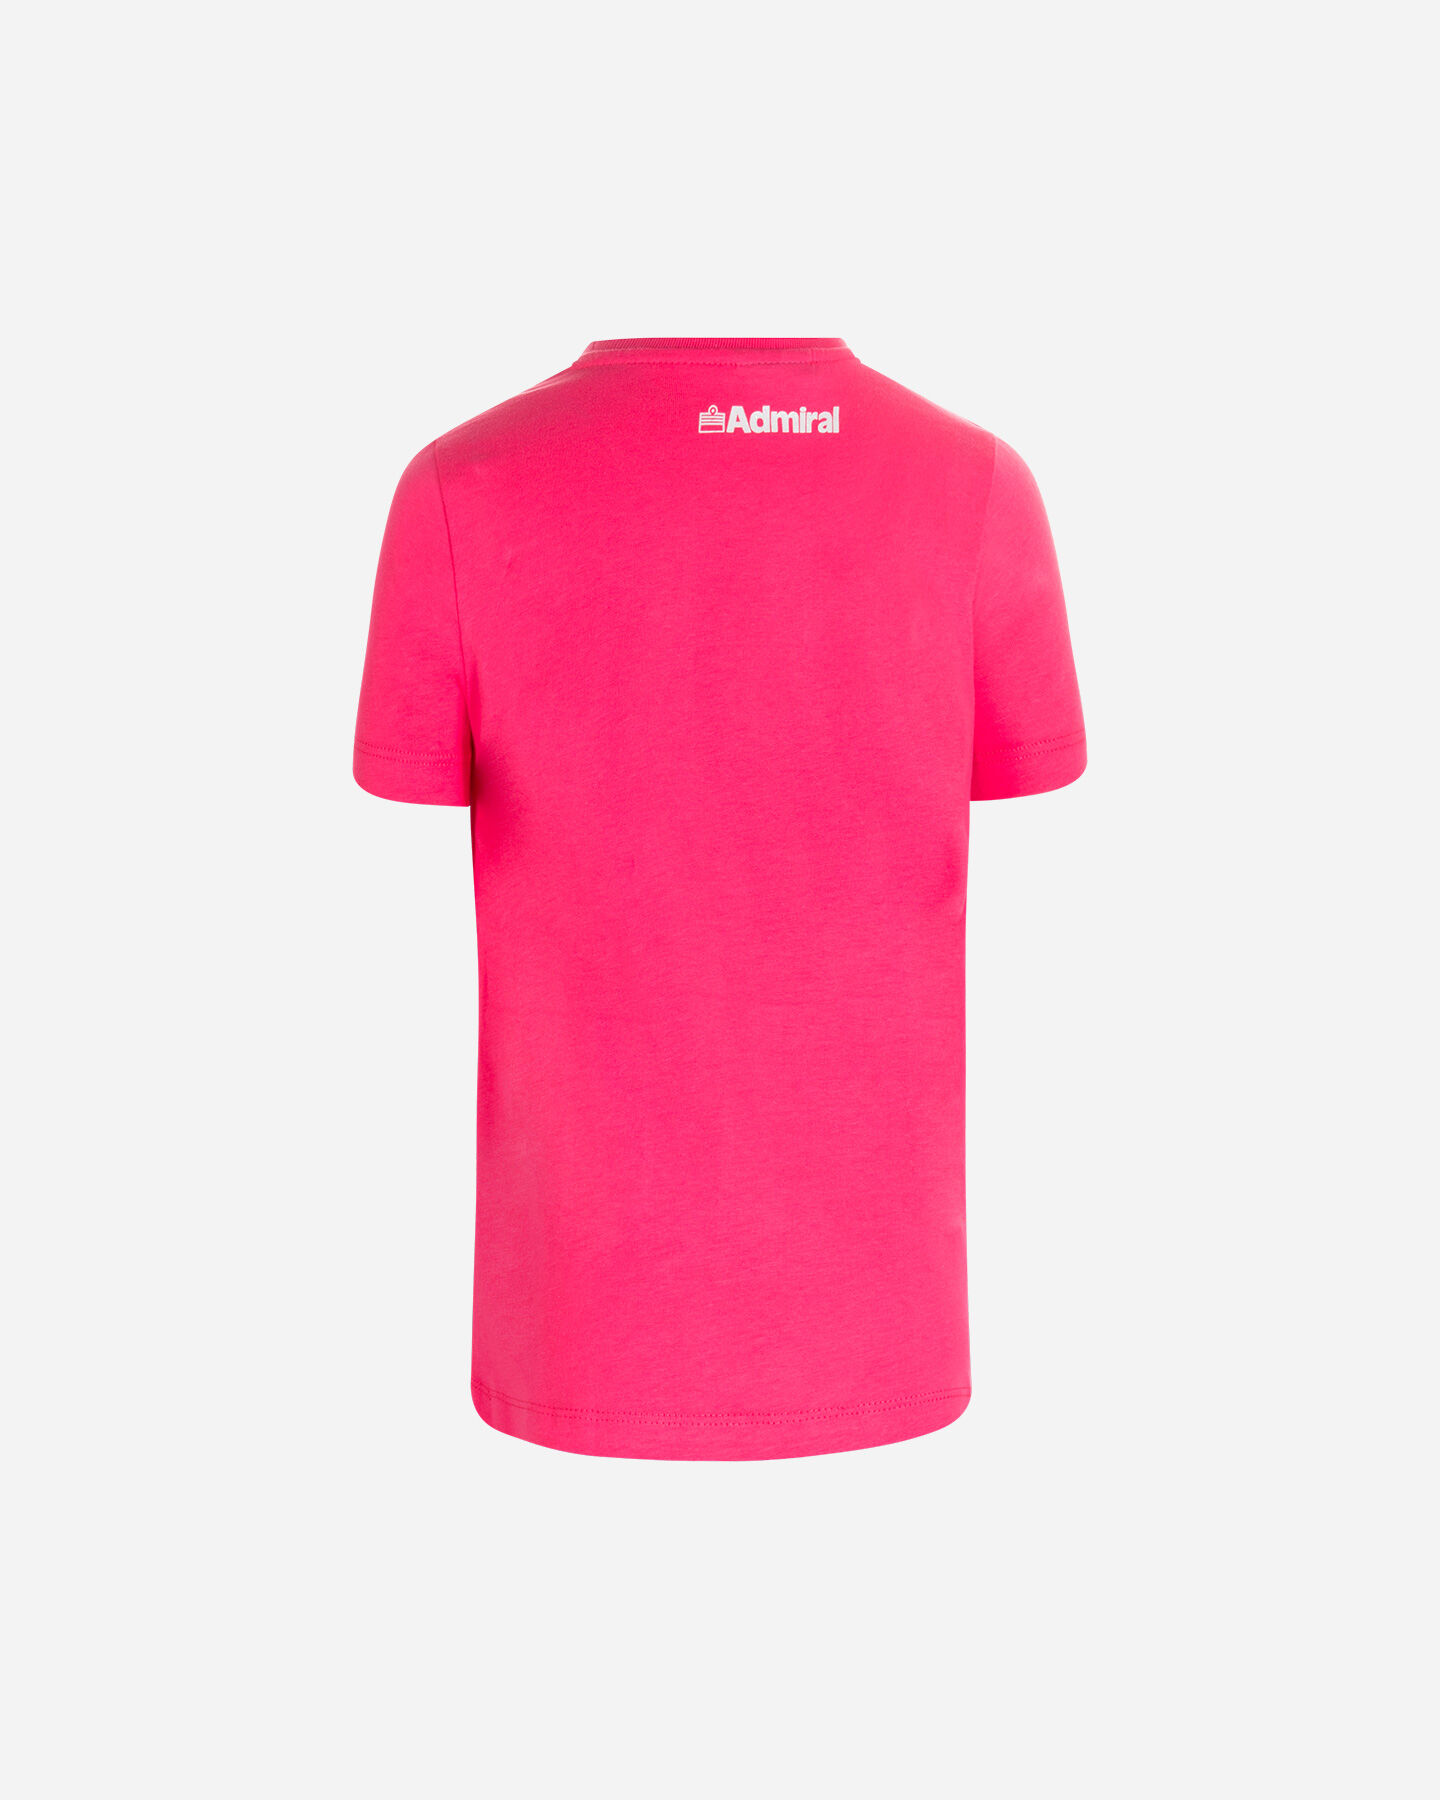  T-Shirt ADMIRAL BASIC SPORT JR S4119986|400|4A scatto 1